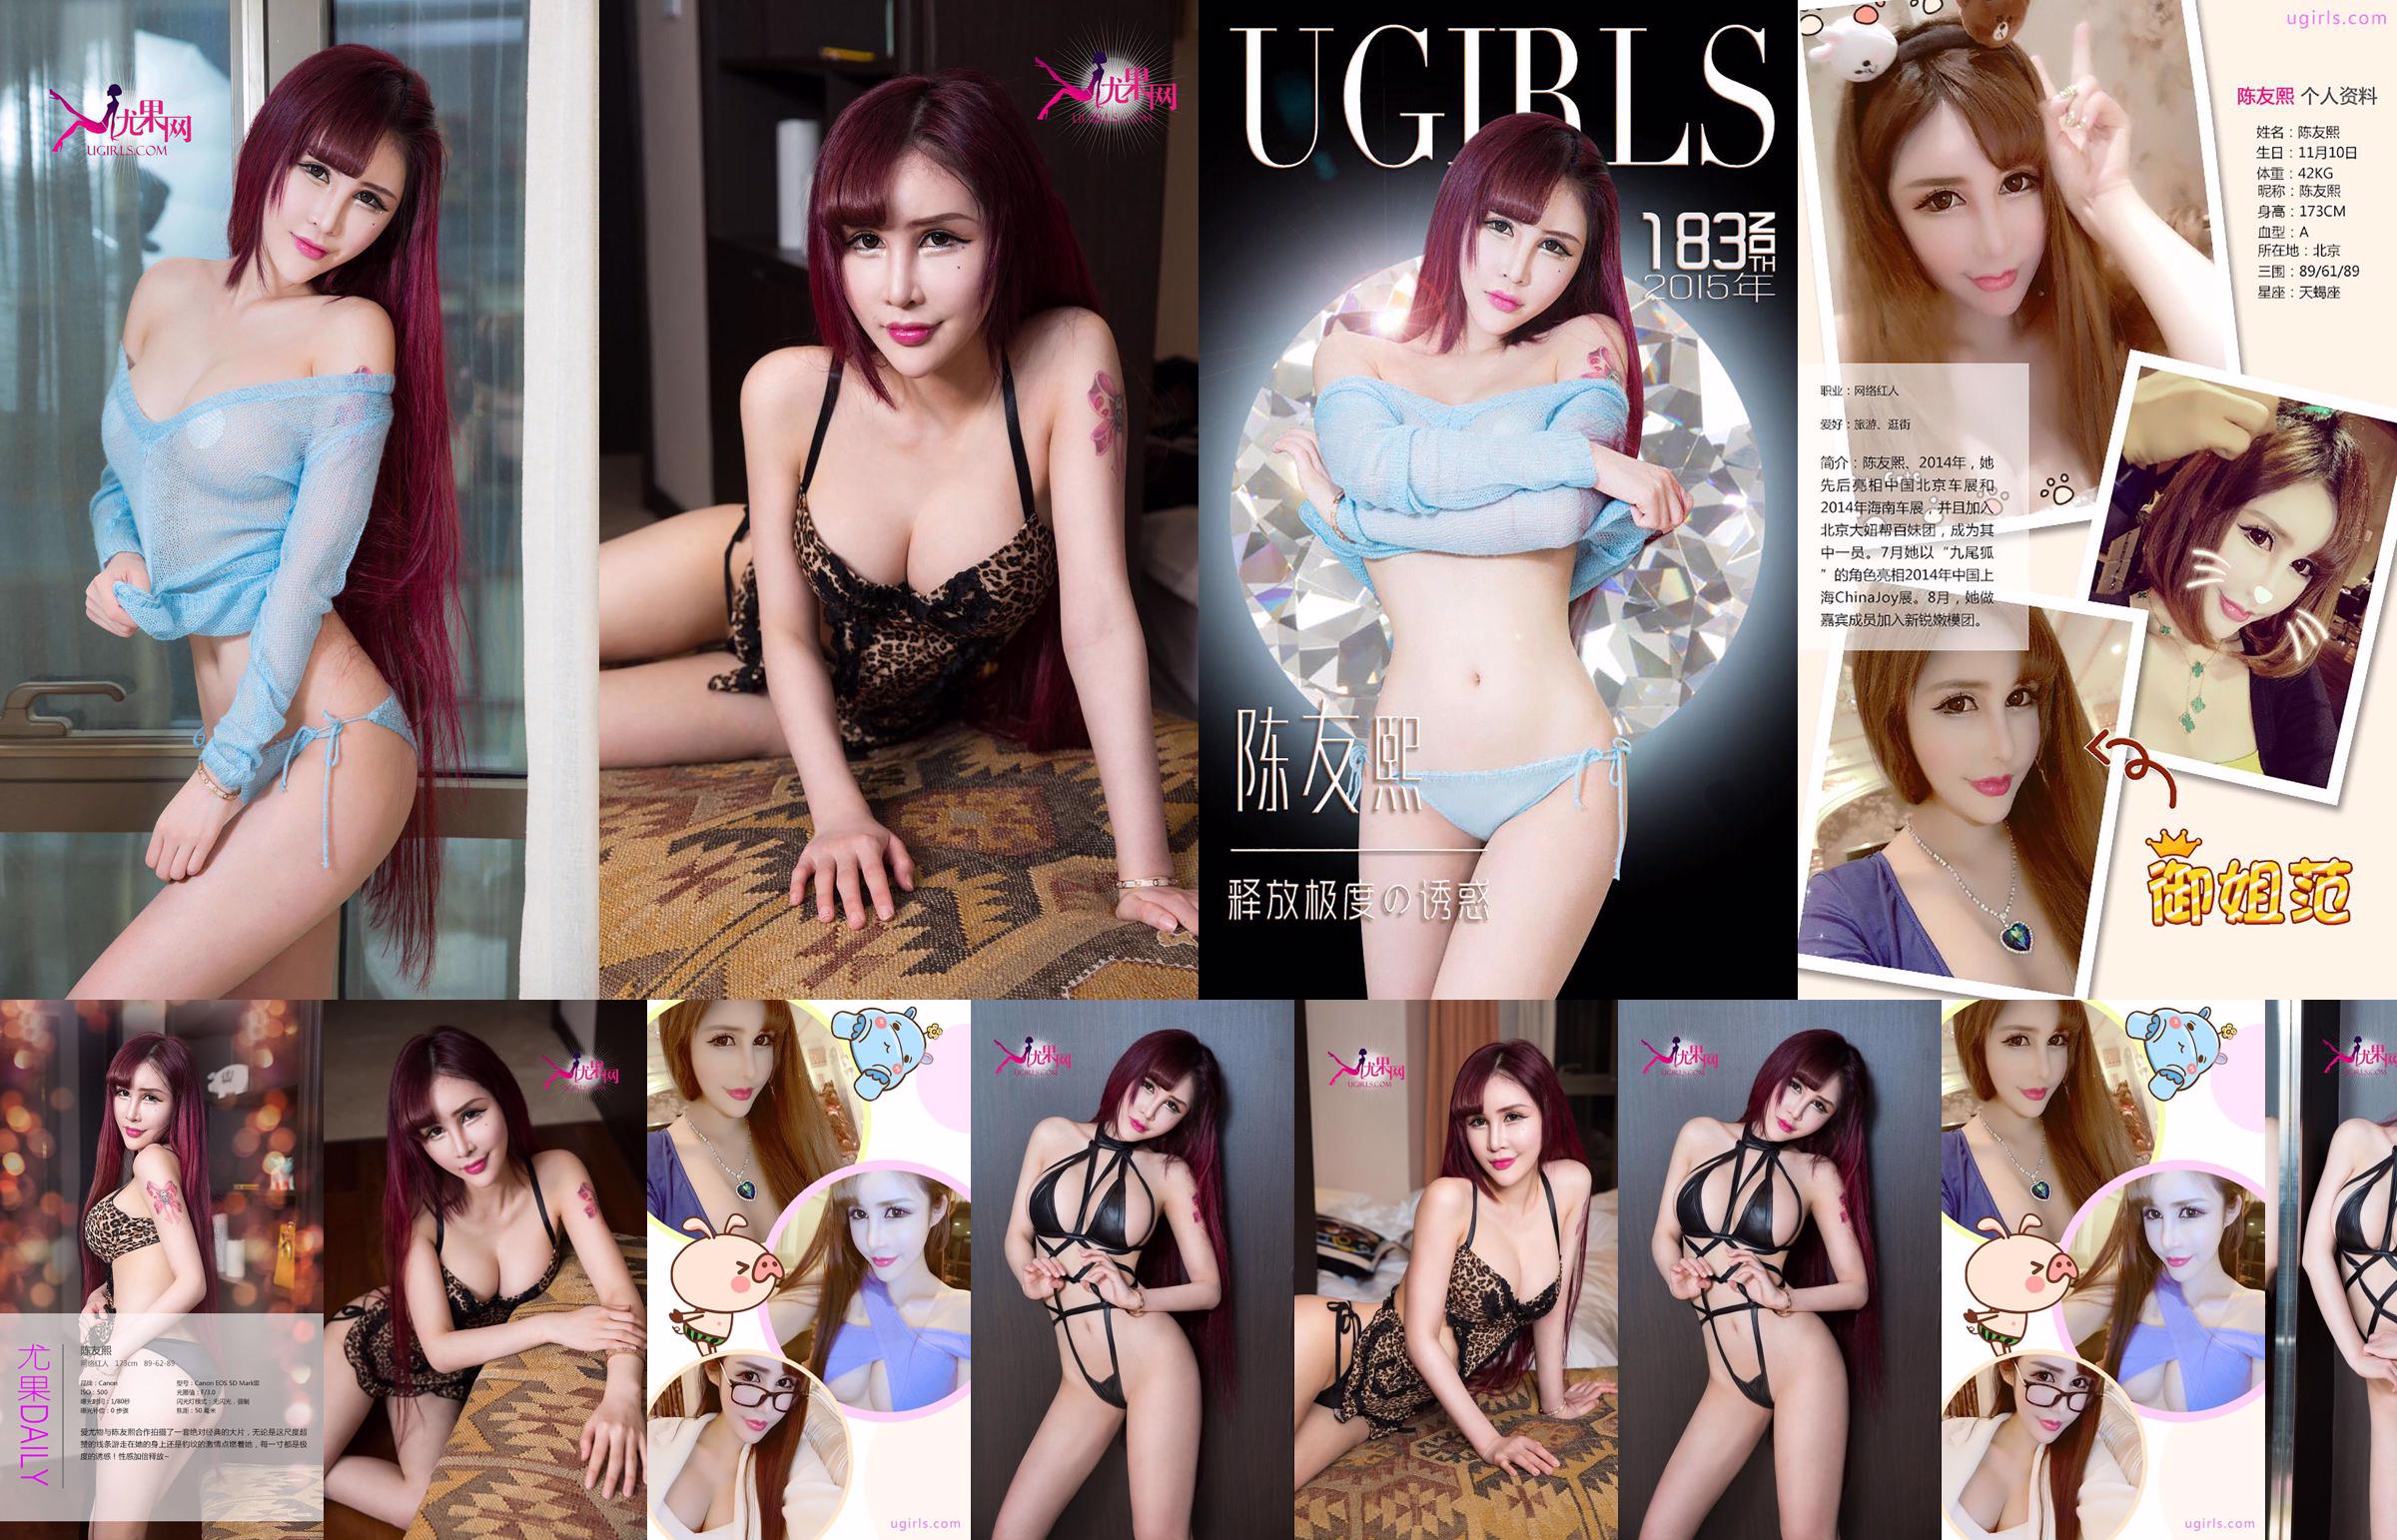 Chen Youxi "Release the Temptation of Jealousy" [爱优物Ugirls] No.183 No.4ade7d Page 1